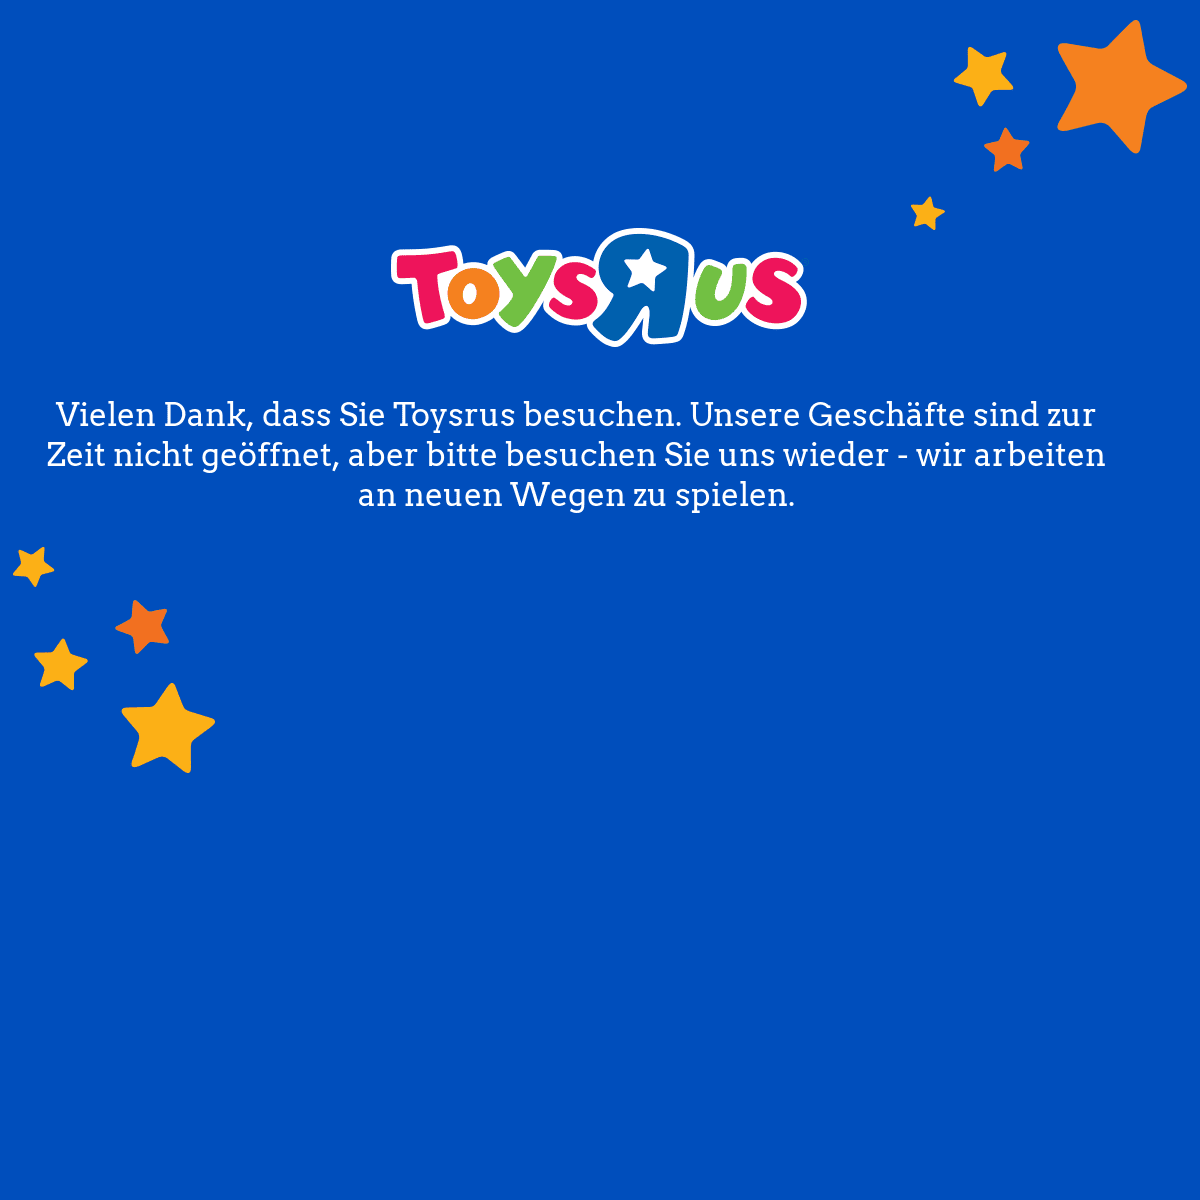 A complete backup of toysrus.at